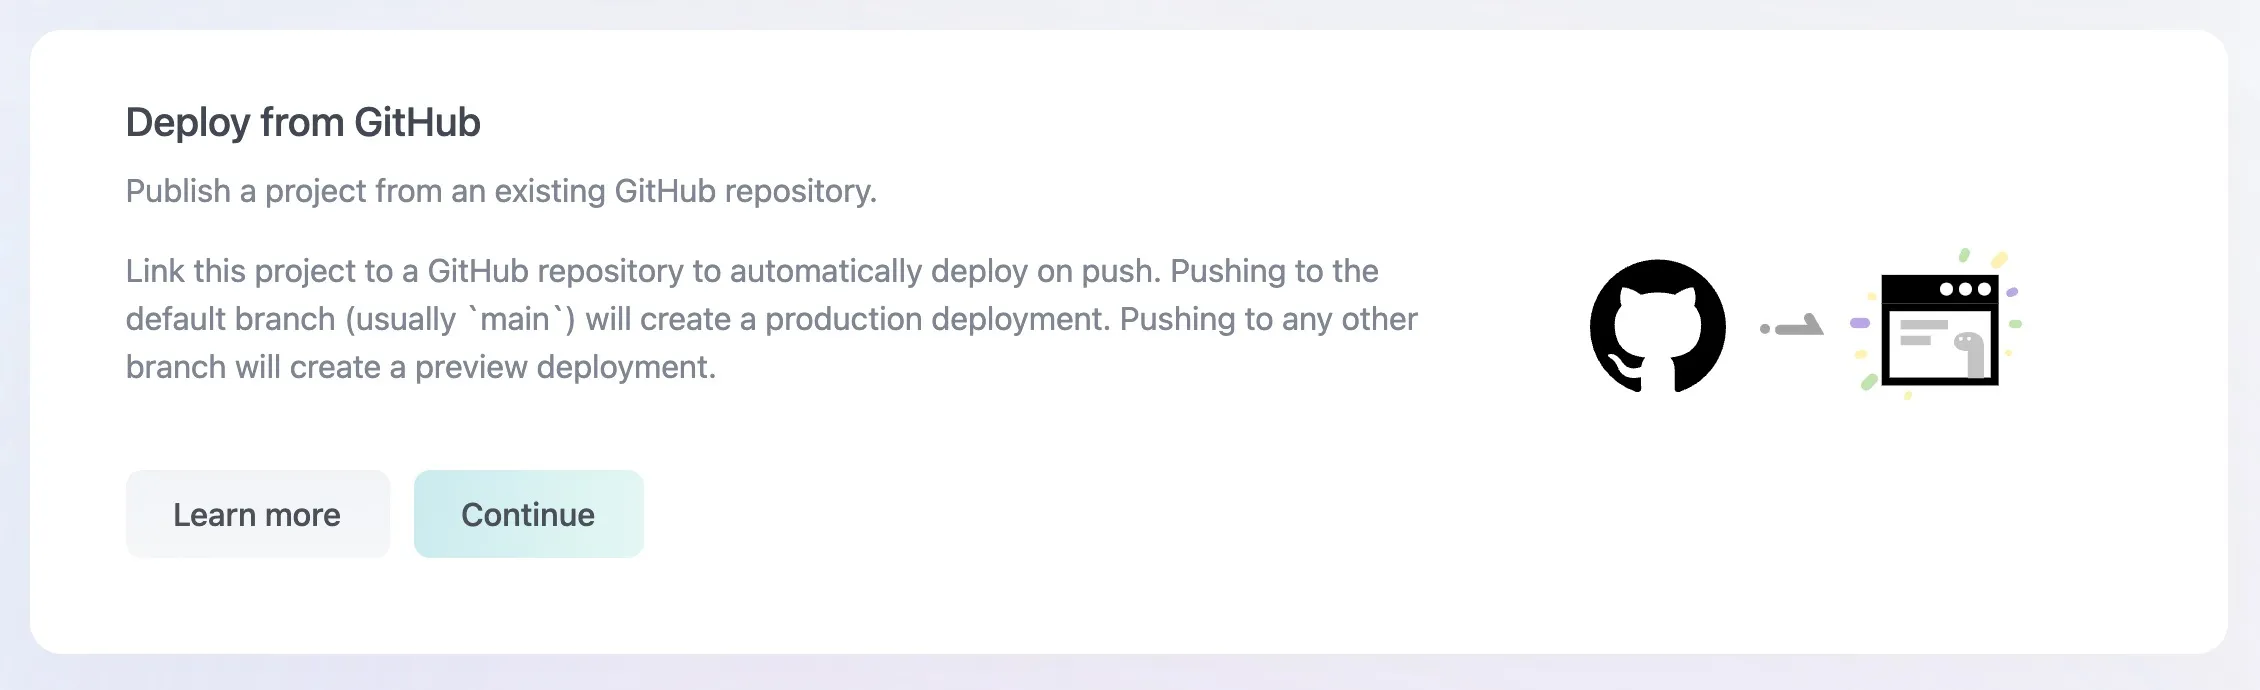 10 - deploy-from-github